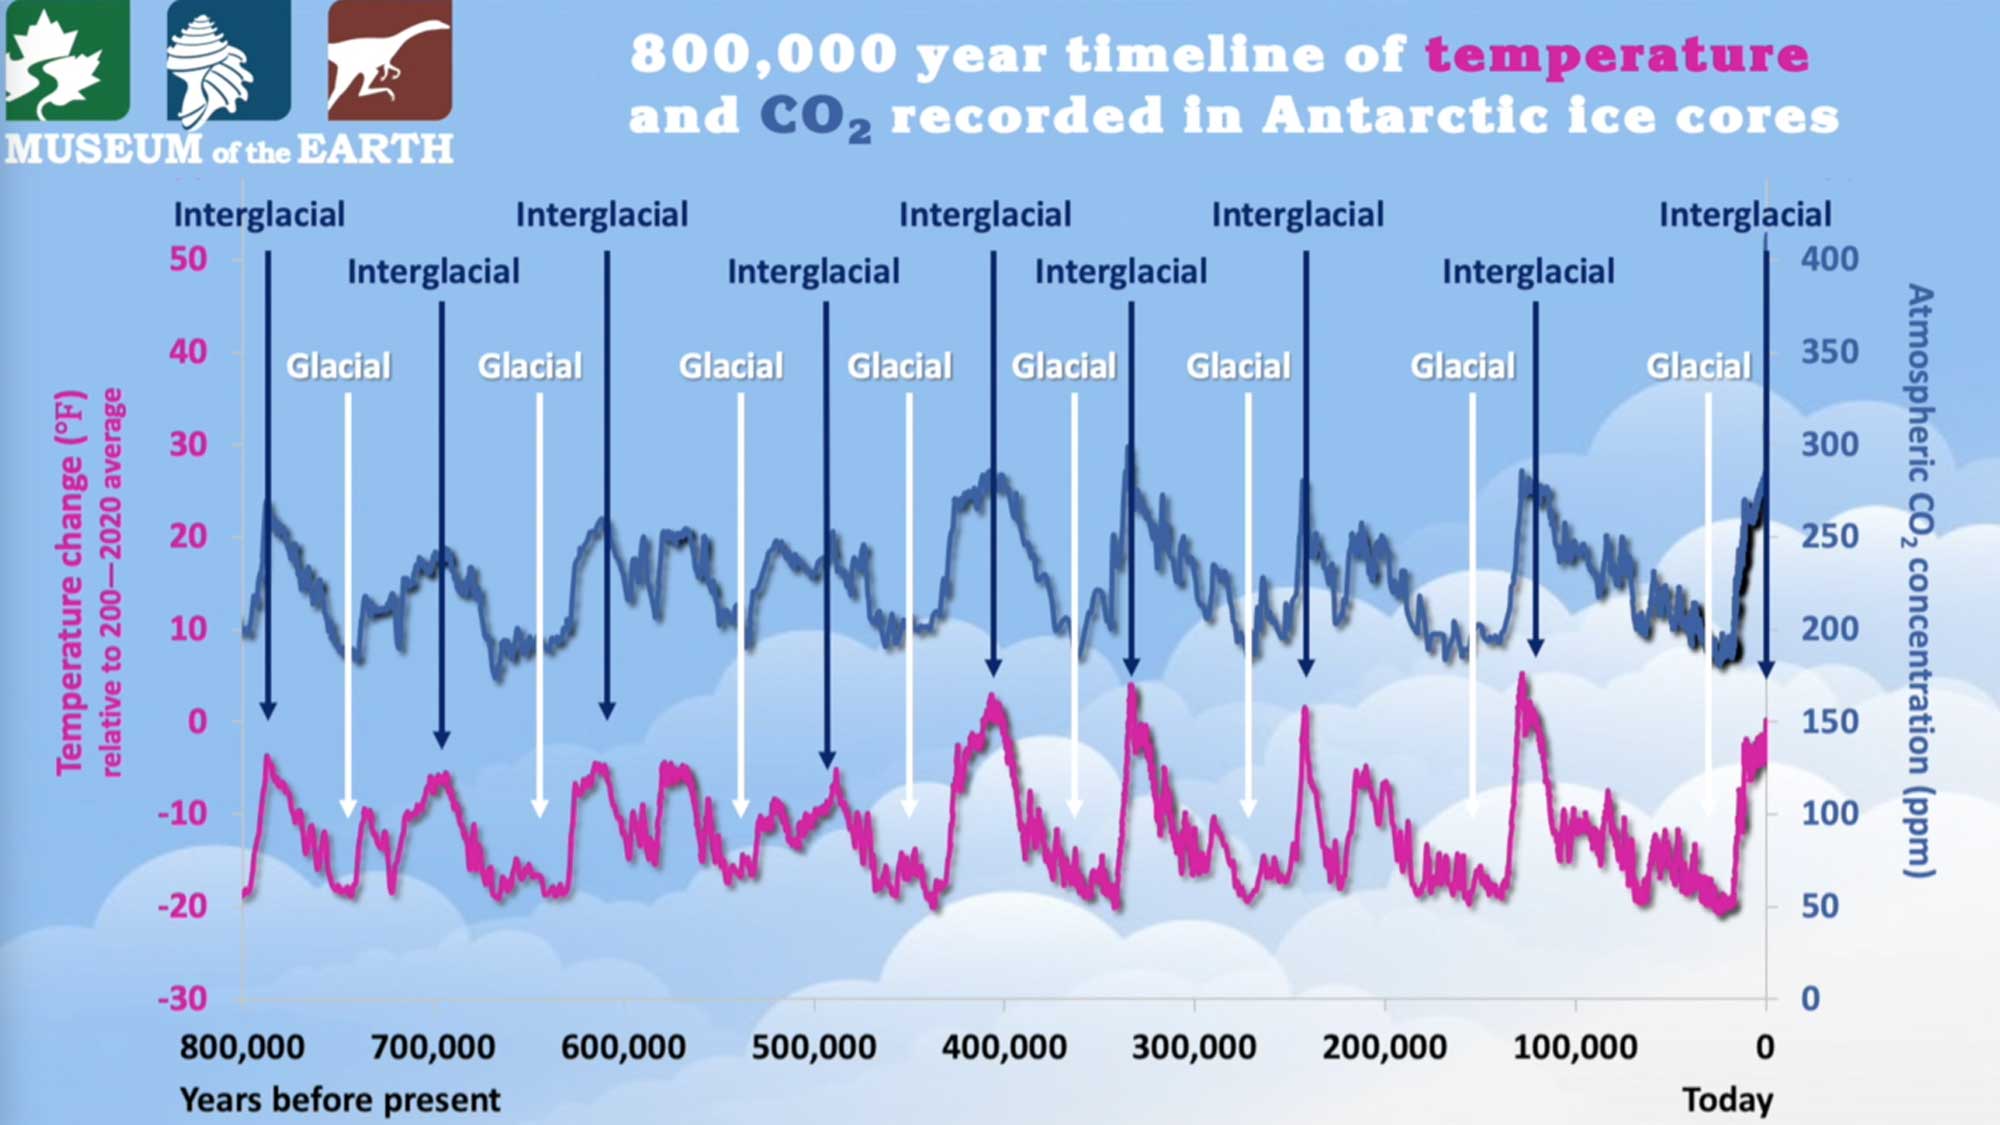 Diagram showing the timeline of glacial and interglacial periods over the last 800,000 years.